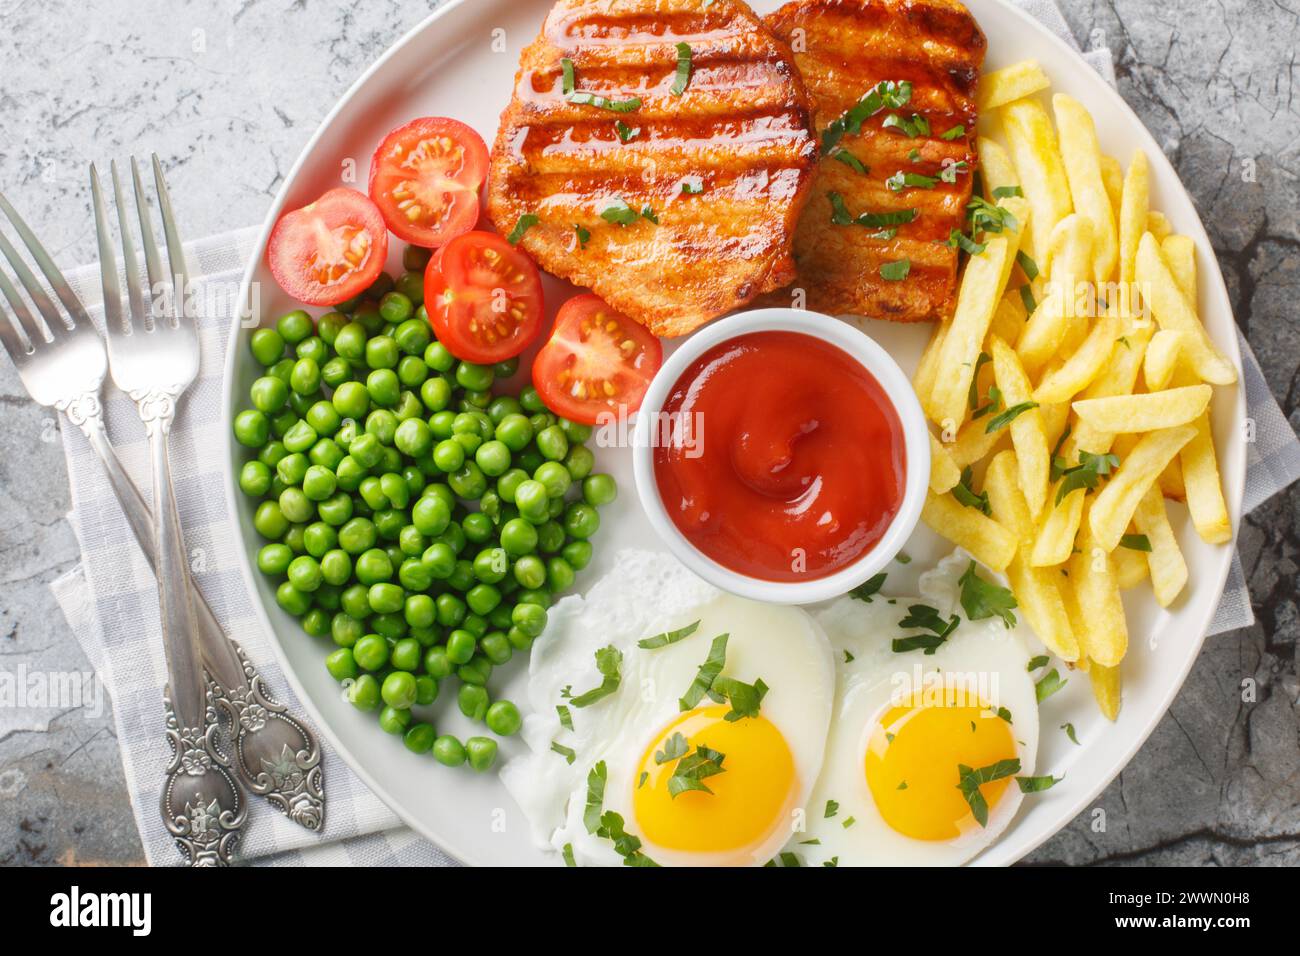 Hearty dinner of grilled loin steak with green peas, fried eggs, french fries, fresh tomatoes and sauce close-up in a plate on the table. Horizontal t Stock Photo